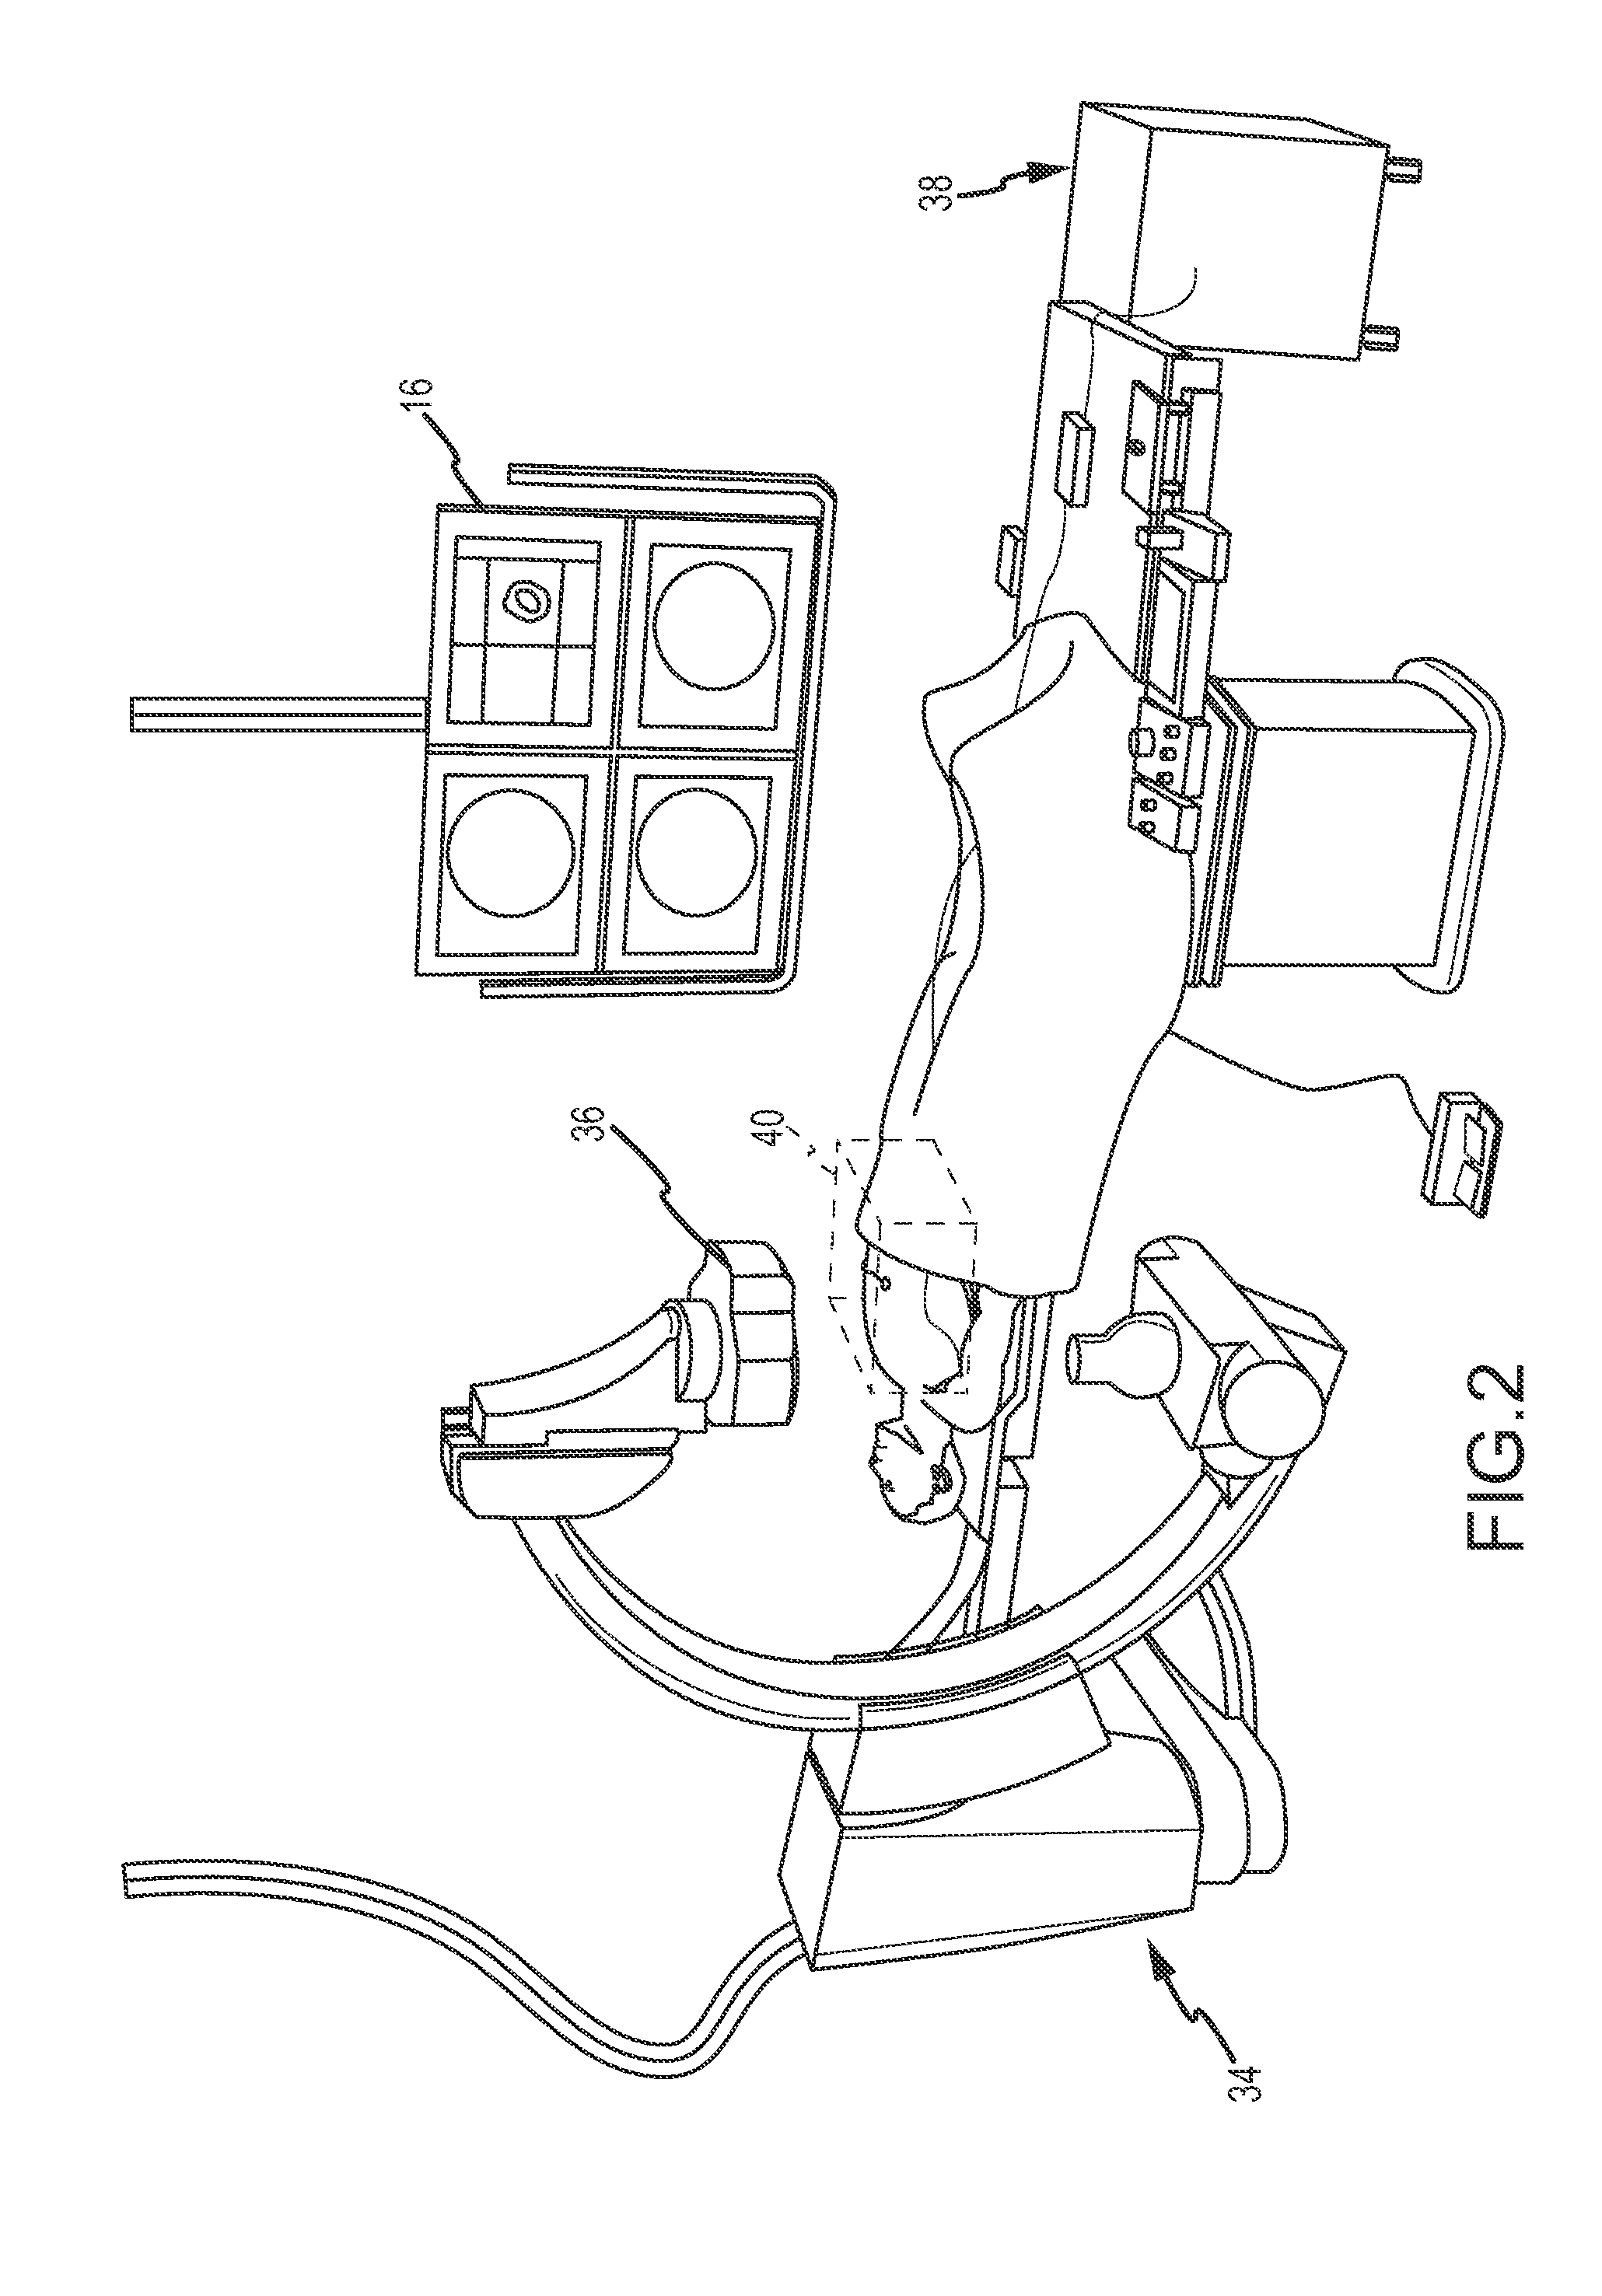 Method for detecting contact with the wall of a region of interest